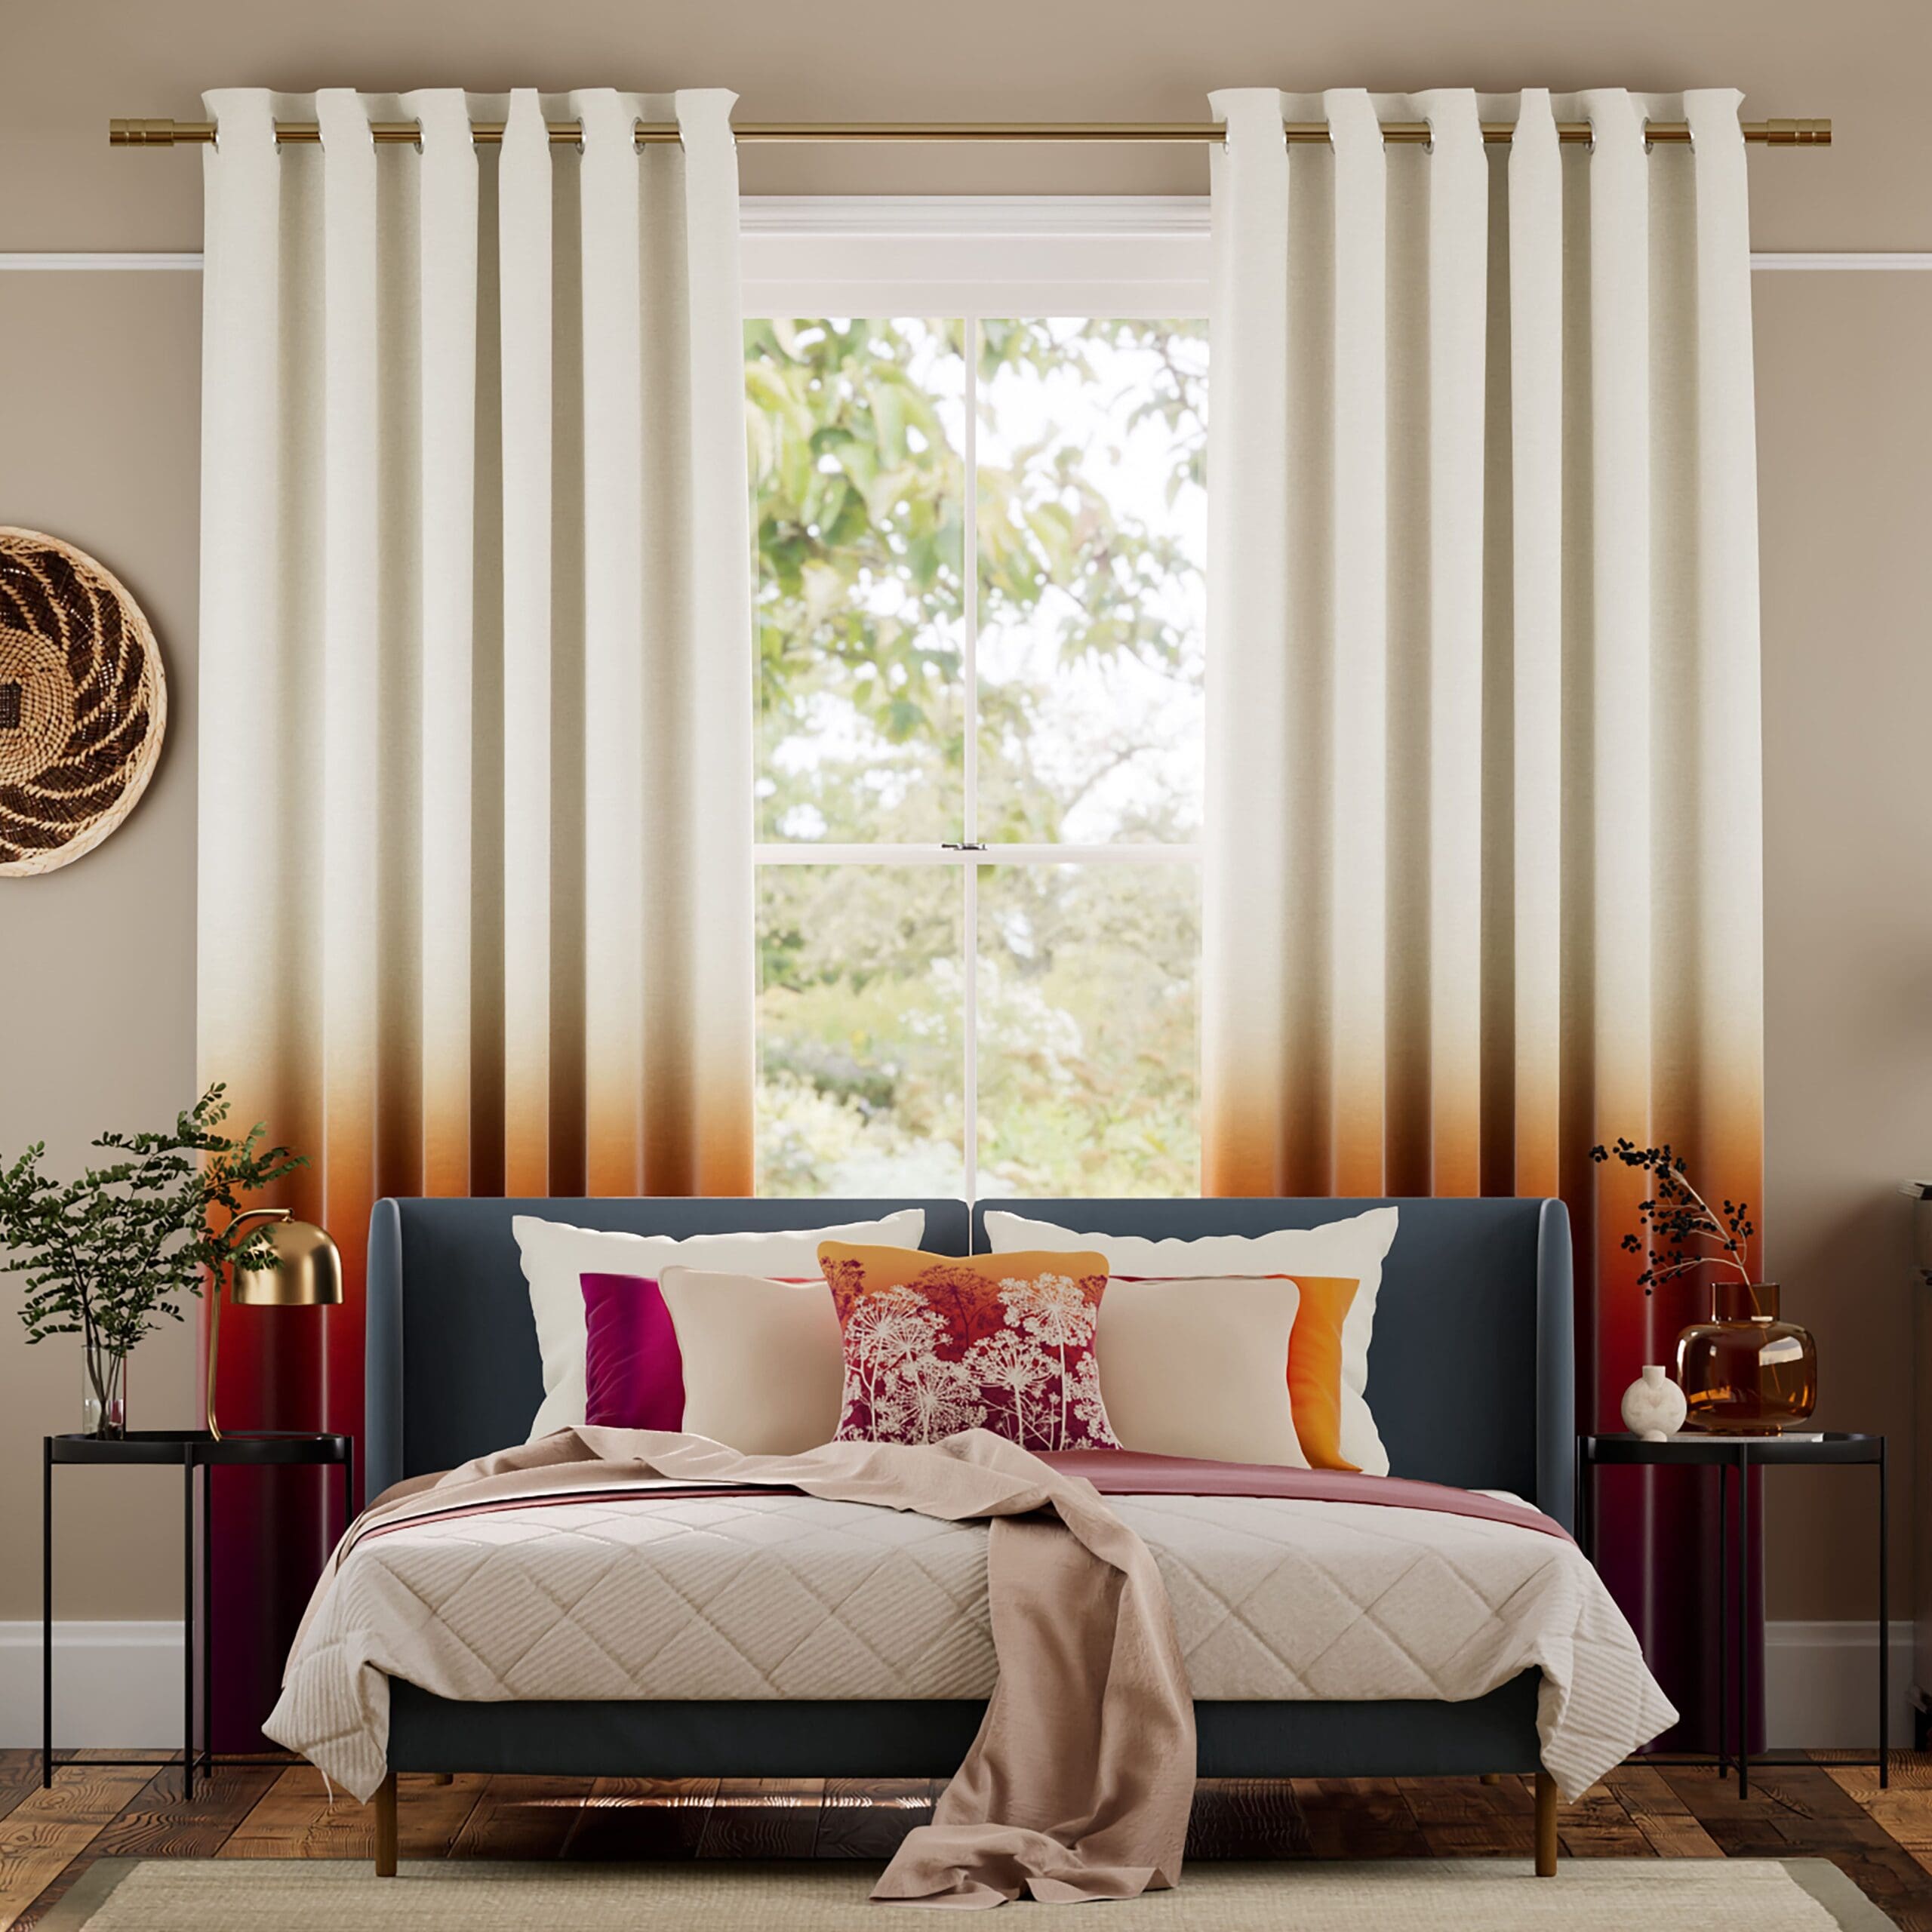 Clarissa Hulse Ombre Sunset Curtains & Dill Sunset Cushions